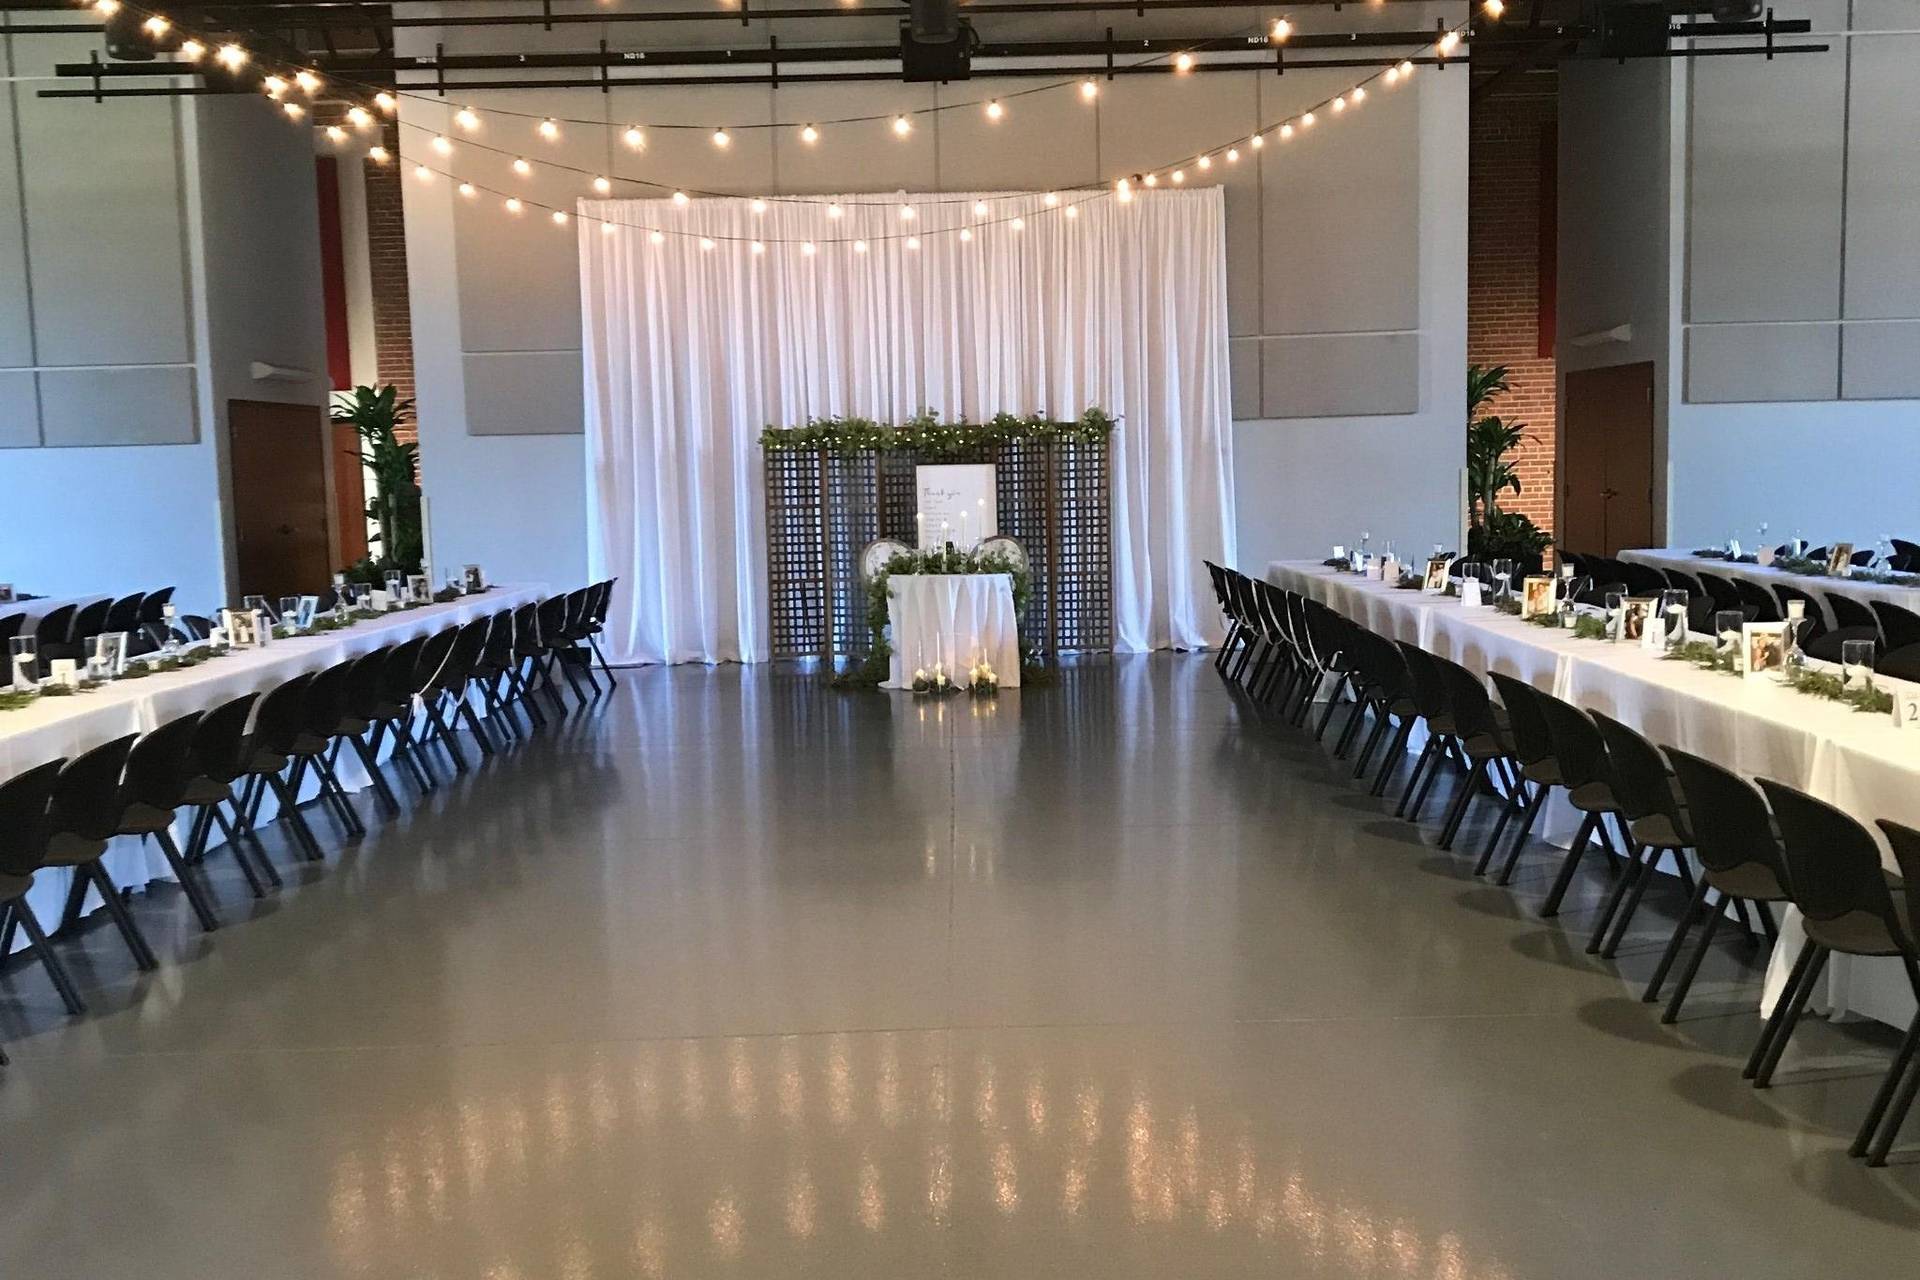 The Events Center at Greer City Park Venue Greer, SC WeddingWire